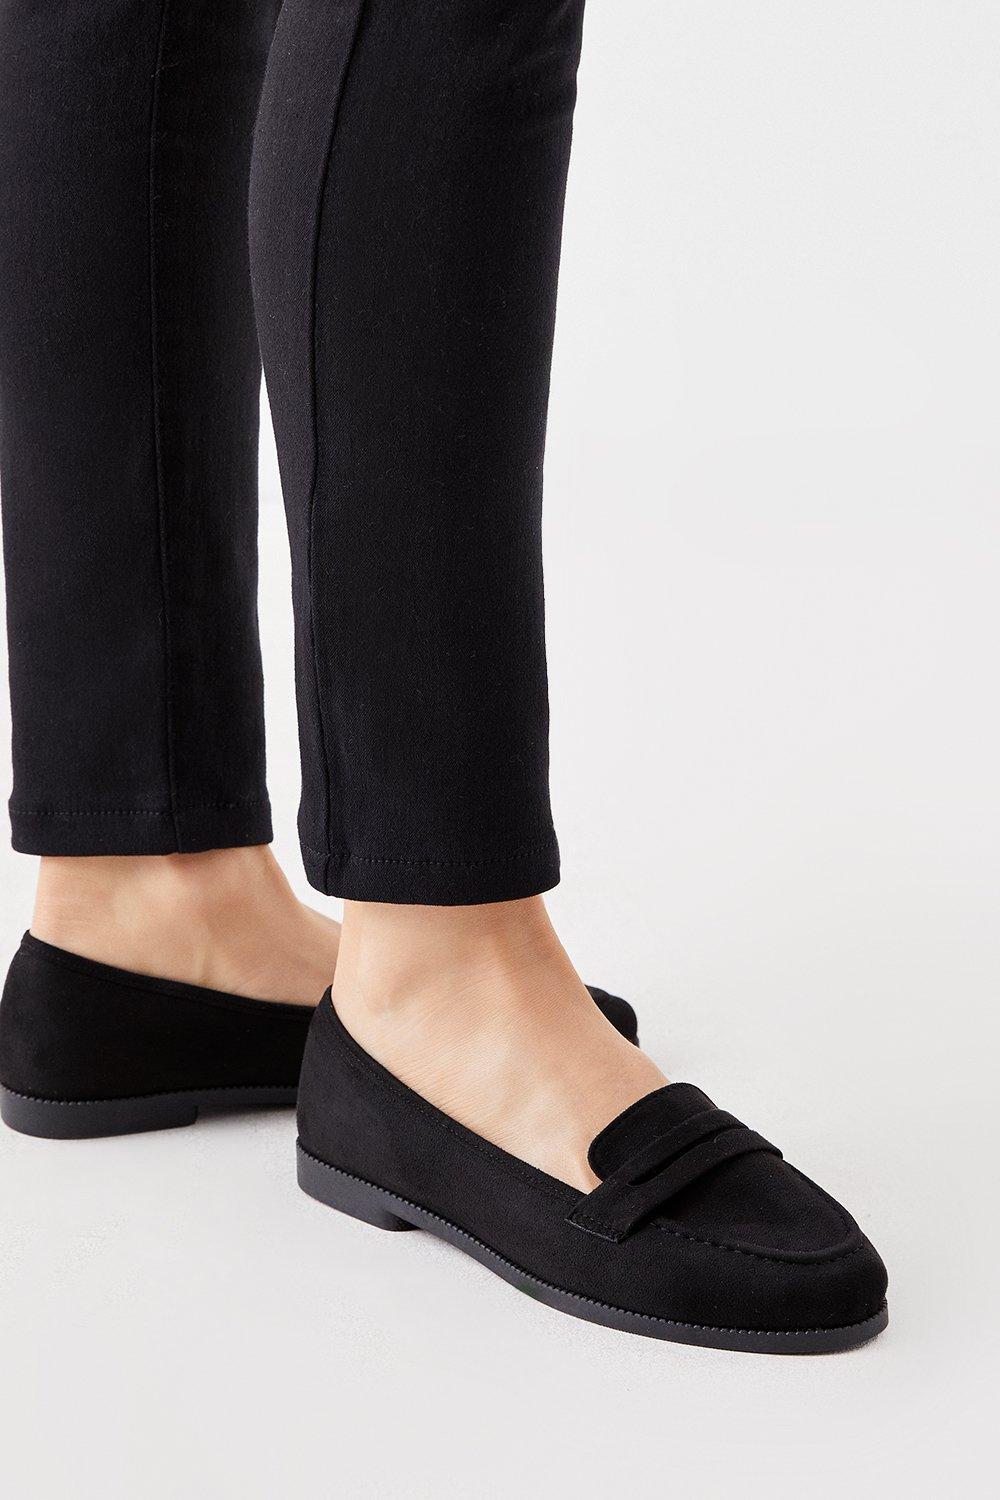 Women's Louie Penny Loafer - natural black - 6